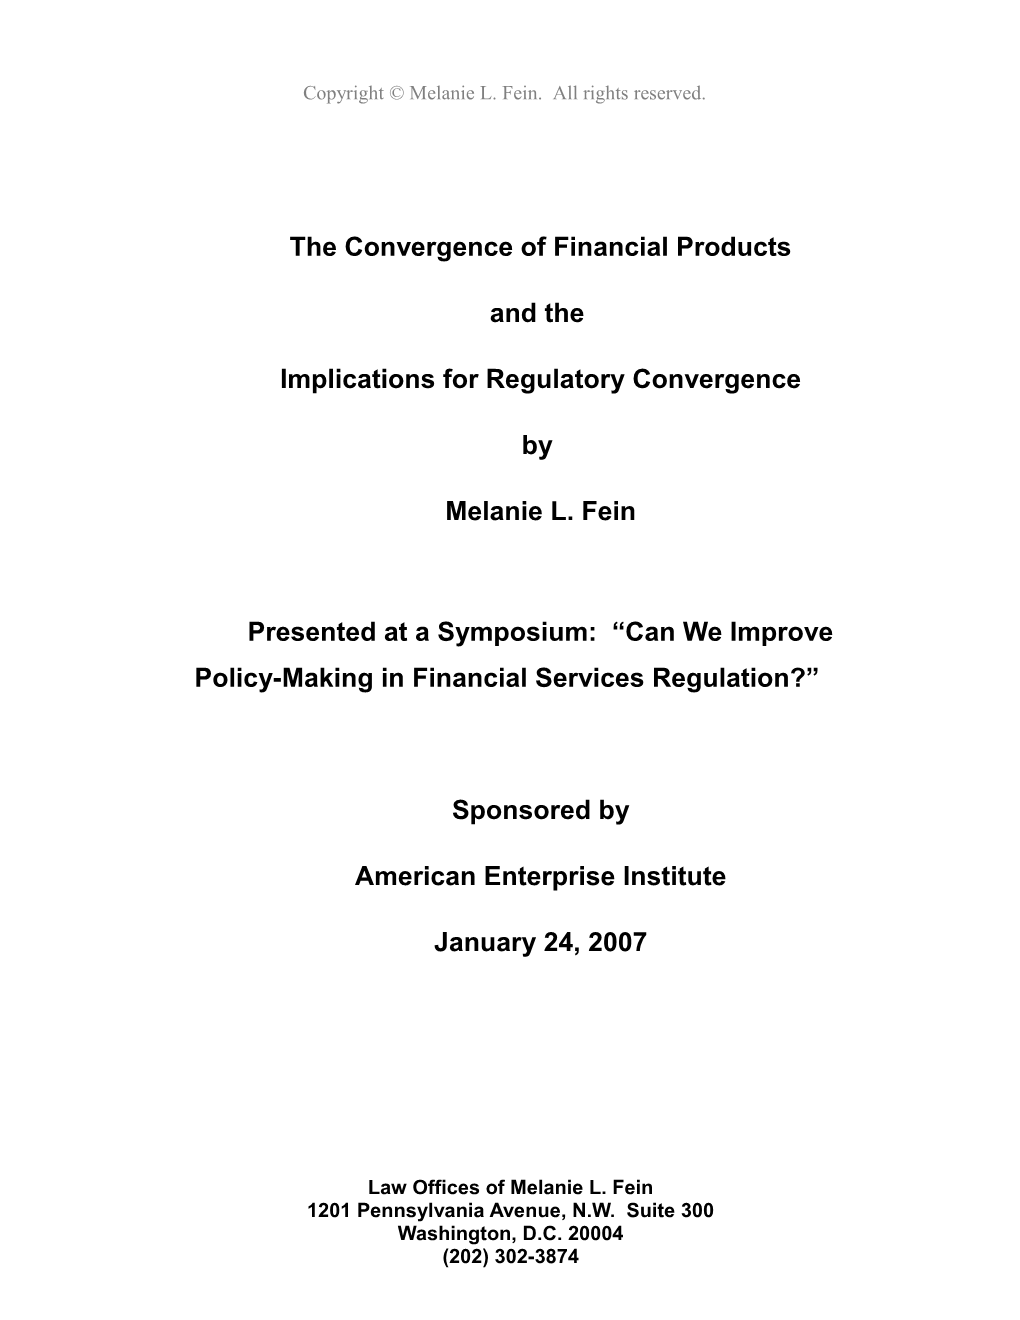 Peter Wallison Asked Me to Prepare This Presentation Addressing the Convergence of Financial